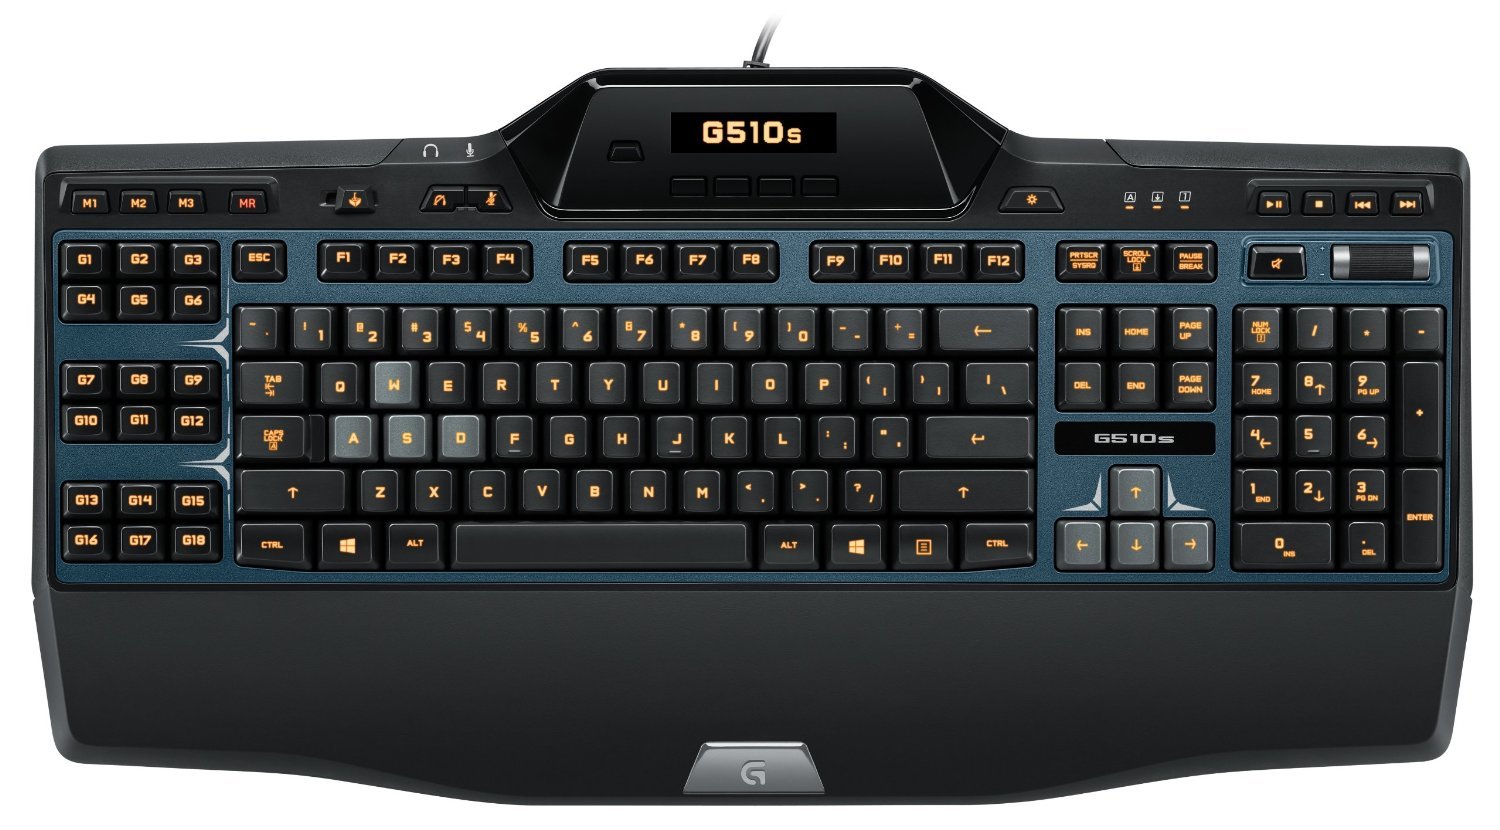 Logitech Gaming Keyboard G510: How To Change Color